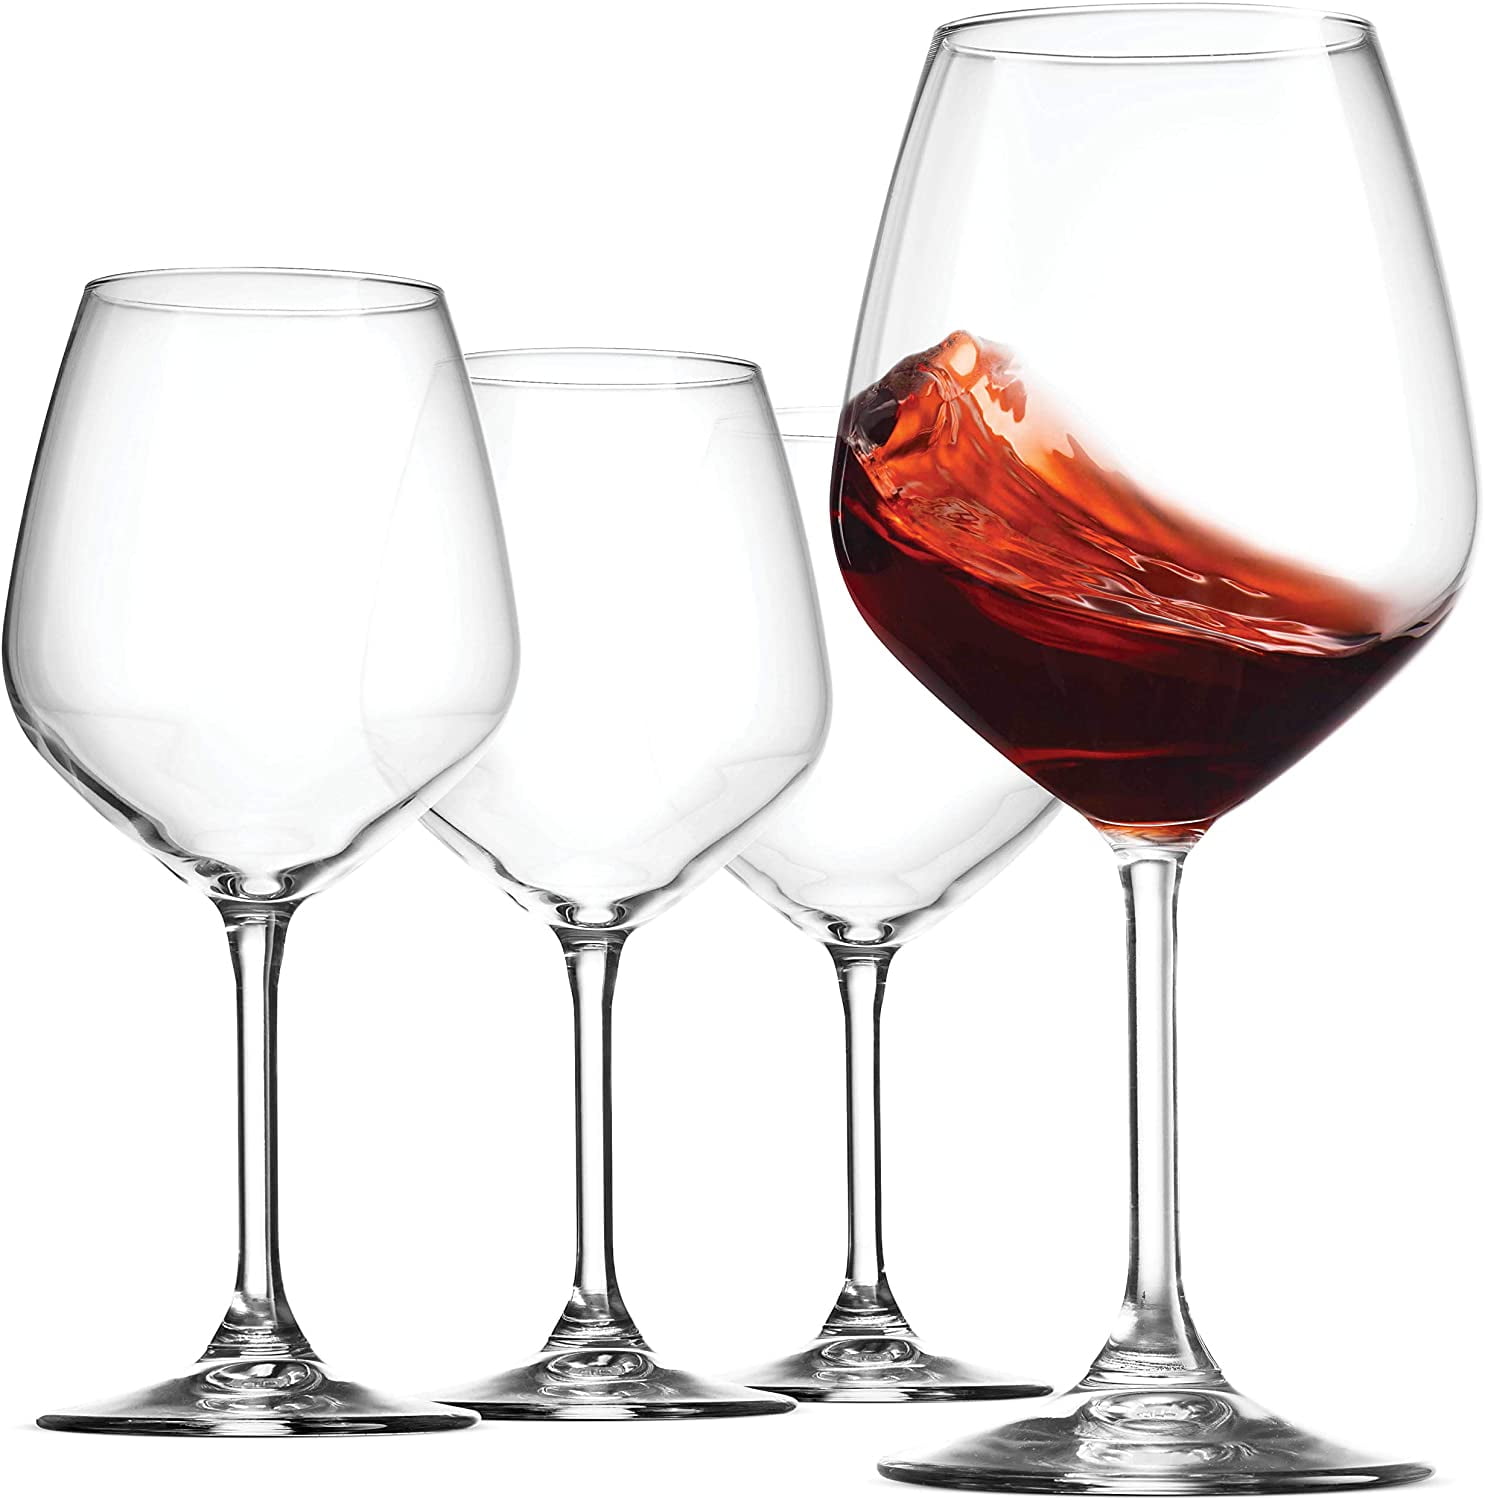 Bormioli Rocco Florian 18 oz. Red Wine / Gin & Tonic Glasses, Lucent Blue (Set of 4)